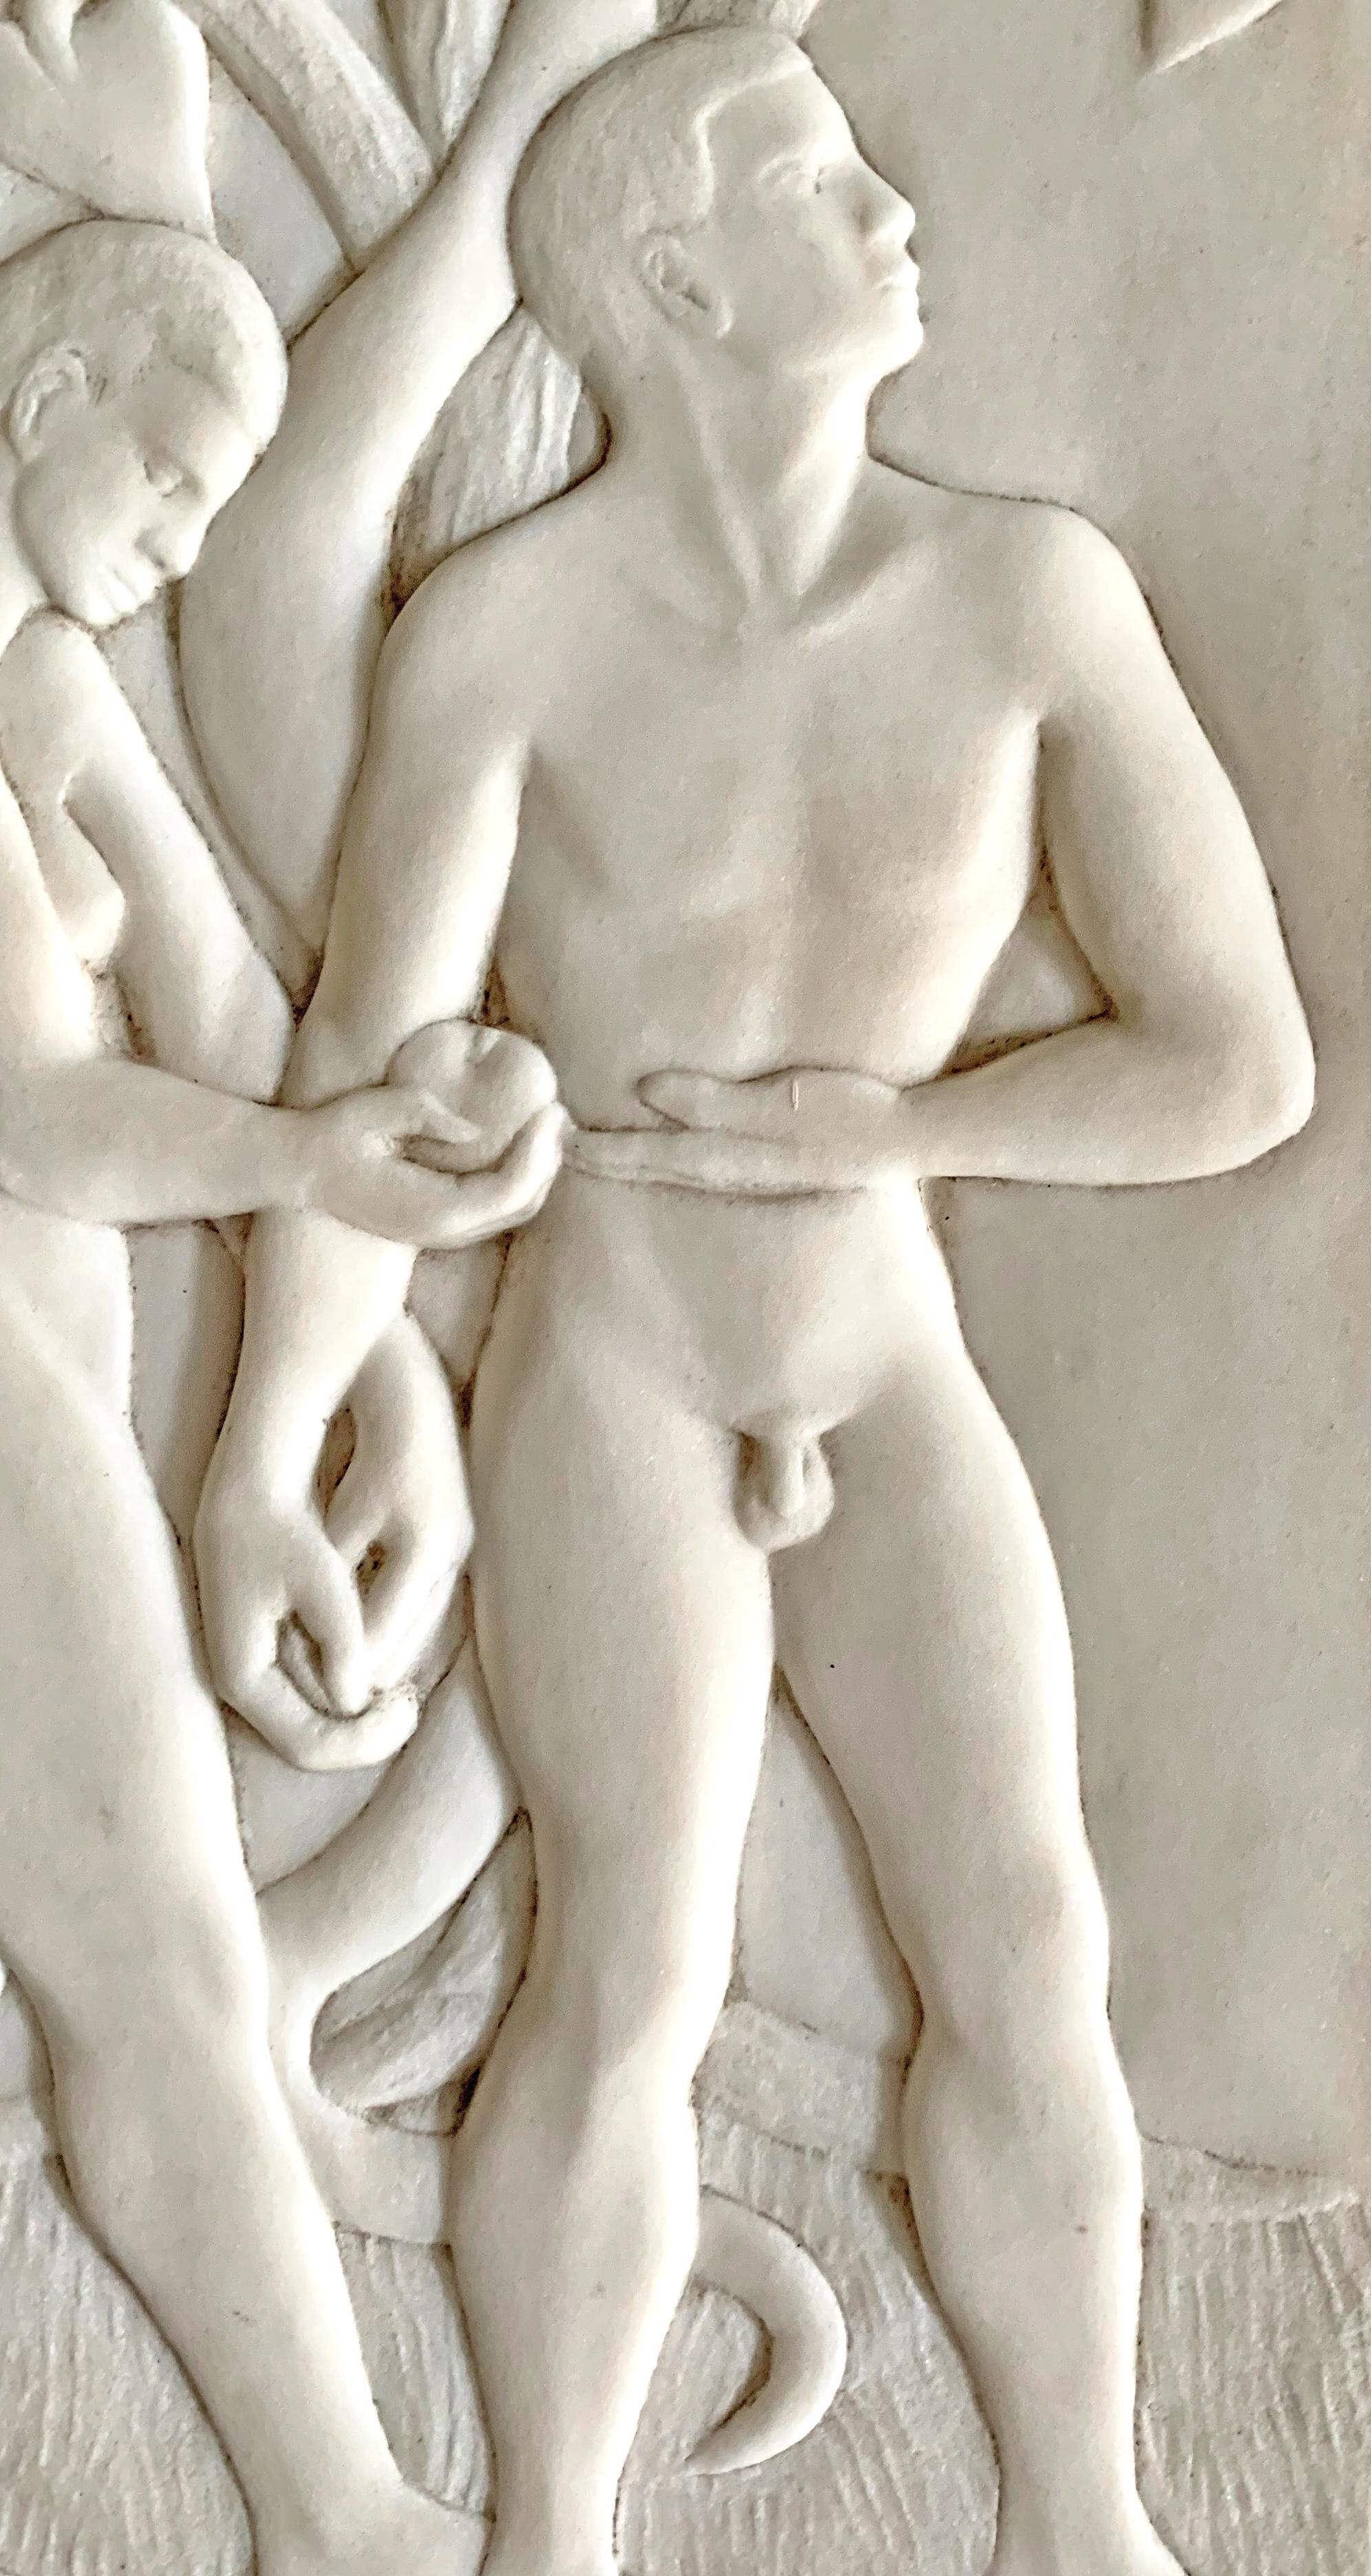 Beautifully and movingly sculpted, this remarkable bas relief marble panel depicting Adam and Eve was sculpted in 1950 by Warren Dewitt Cheney, a California artist. Even though the apple of knowledge is being passed from Eve to Adam, they are